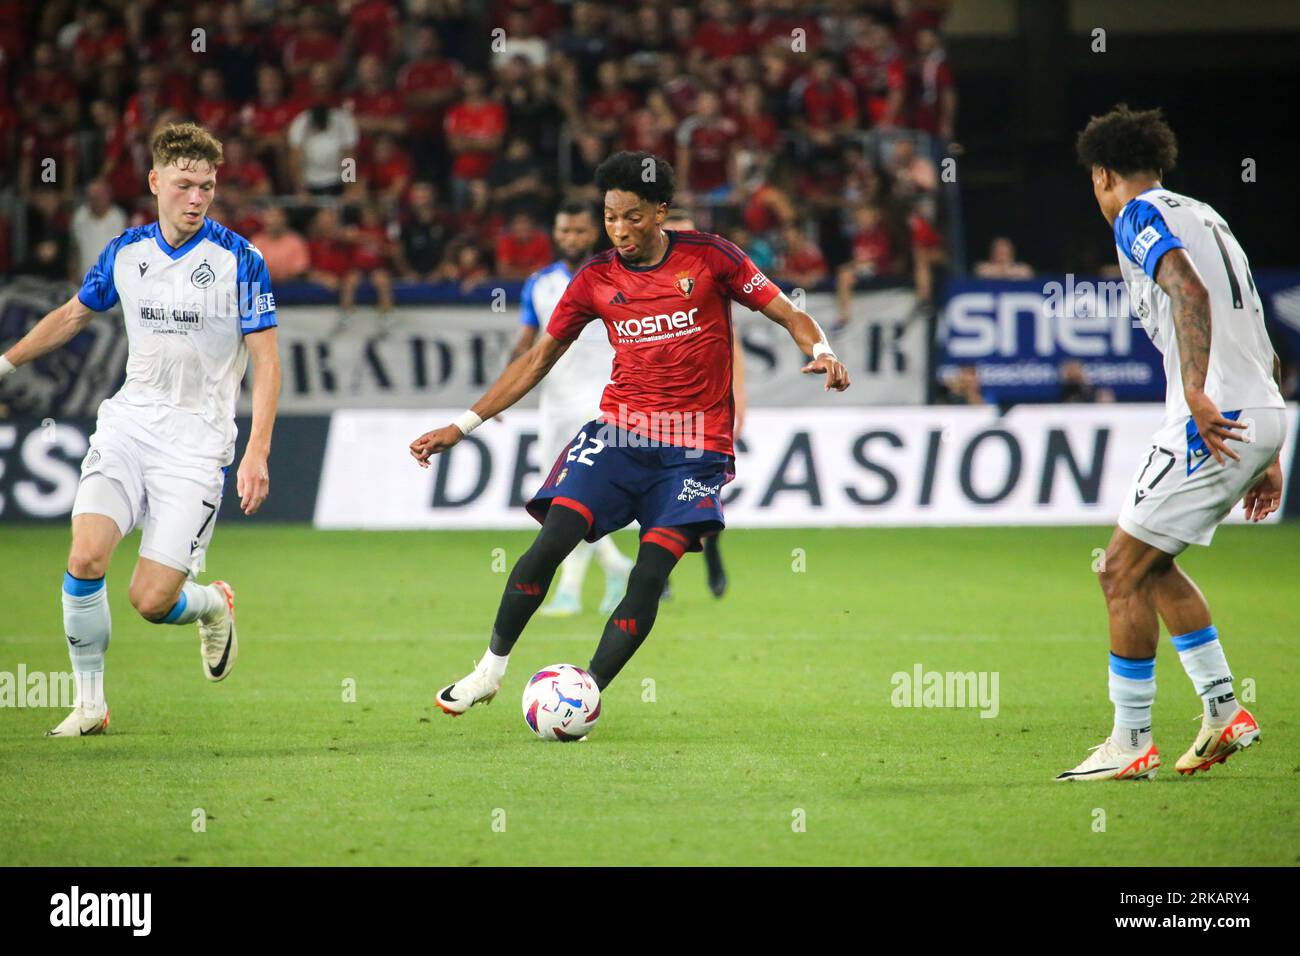 Pamplona, Spain, 24th August, 2023: CA Osasuna's player, Johan Mojica (22) goes from two opponents during the first leg of the previous round of the UEFA Europa Conference League 2023-24 between CA Osasuna and the Club Brugge at the El Sadar Stadium, in Pamplona, on August 24, 2023. Credit: Alberto Brevers / Alamy Live News. Stock Photo